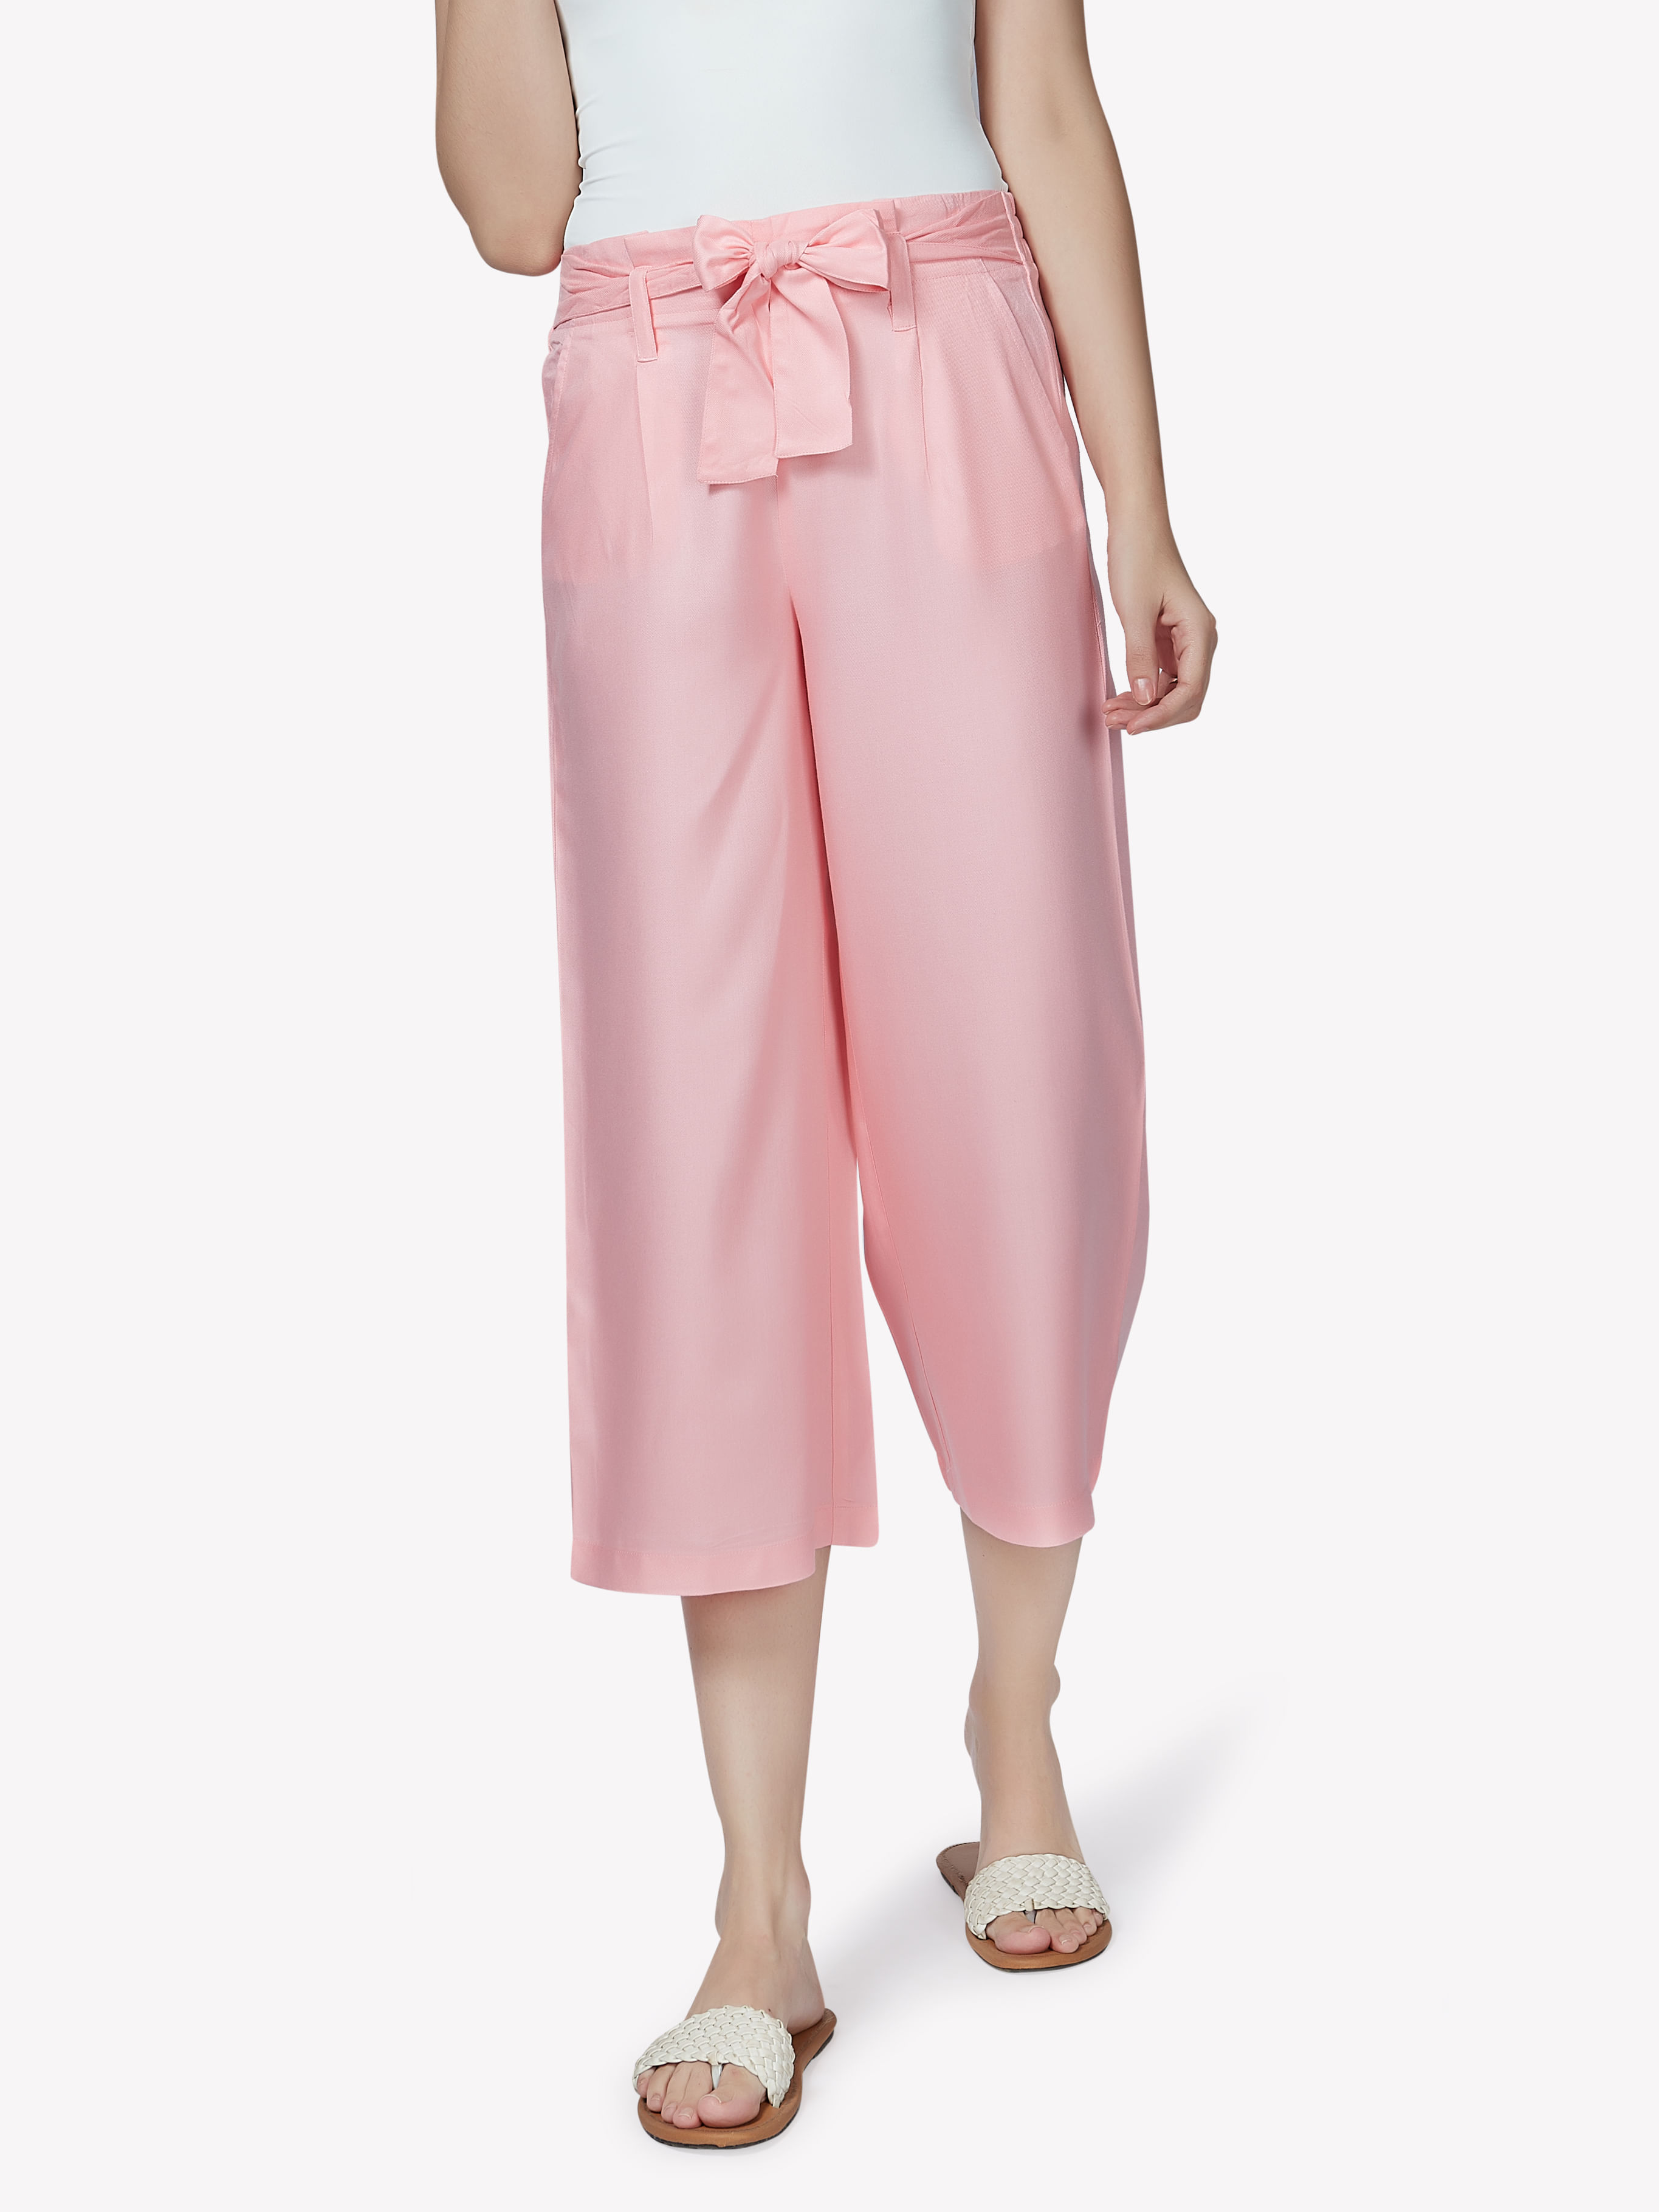 OYS - XS - S - Final Sale - Dietrich Vintage Wide Leg Palazzo Pants in Light  Rose Crepe 32